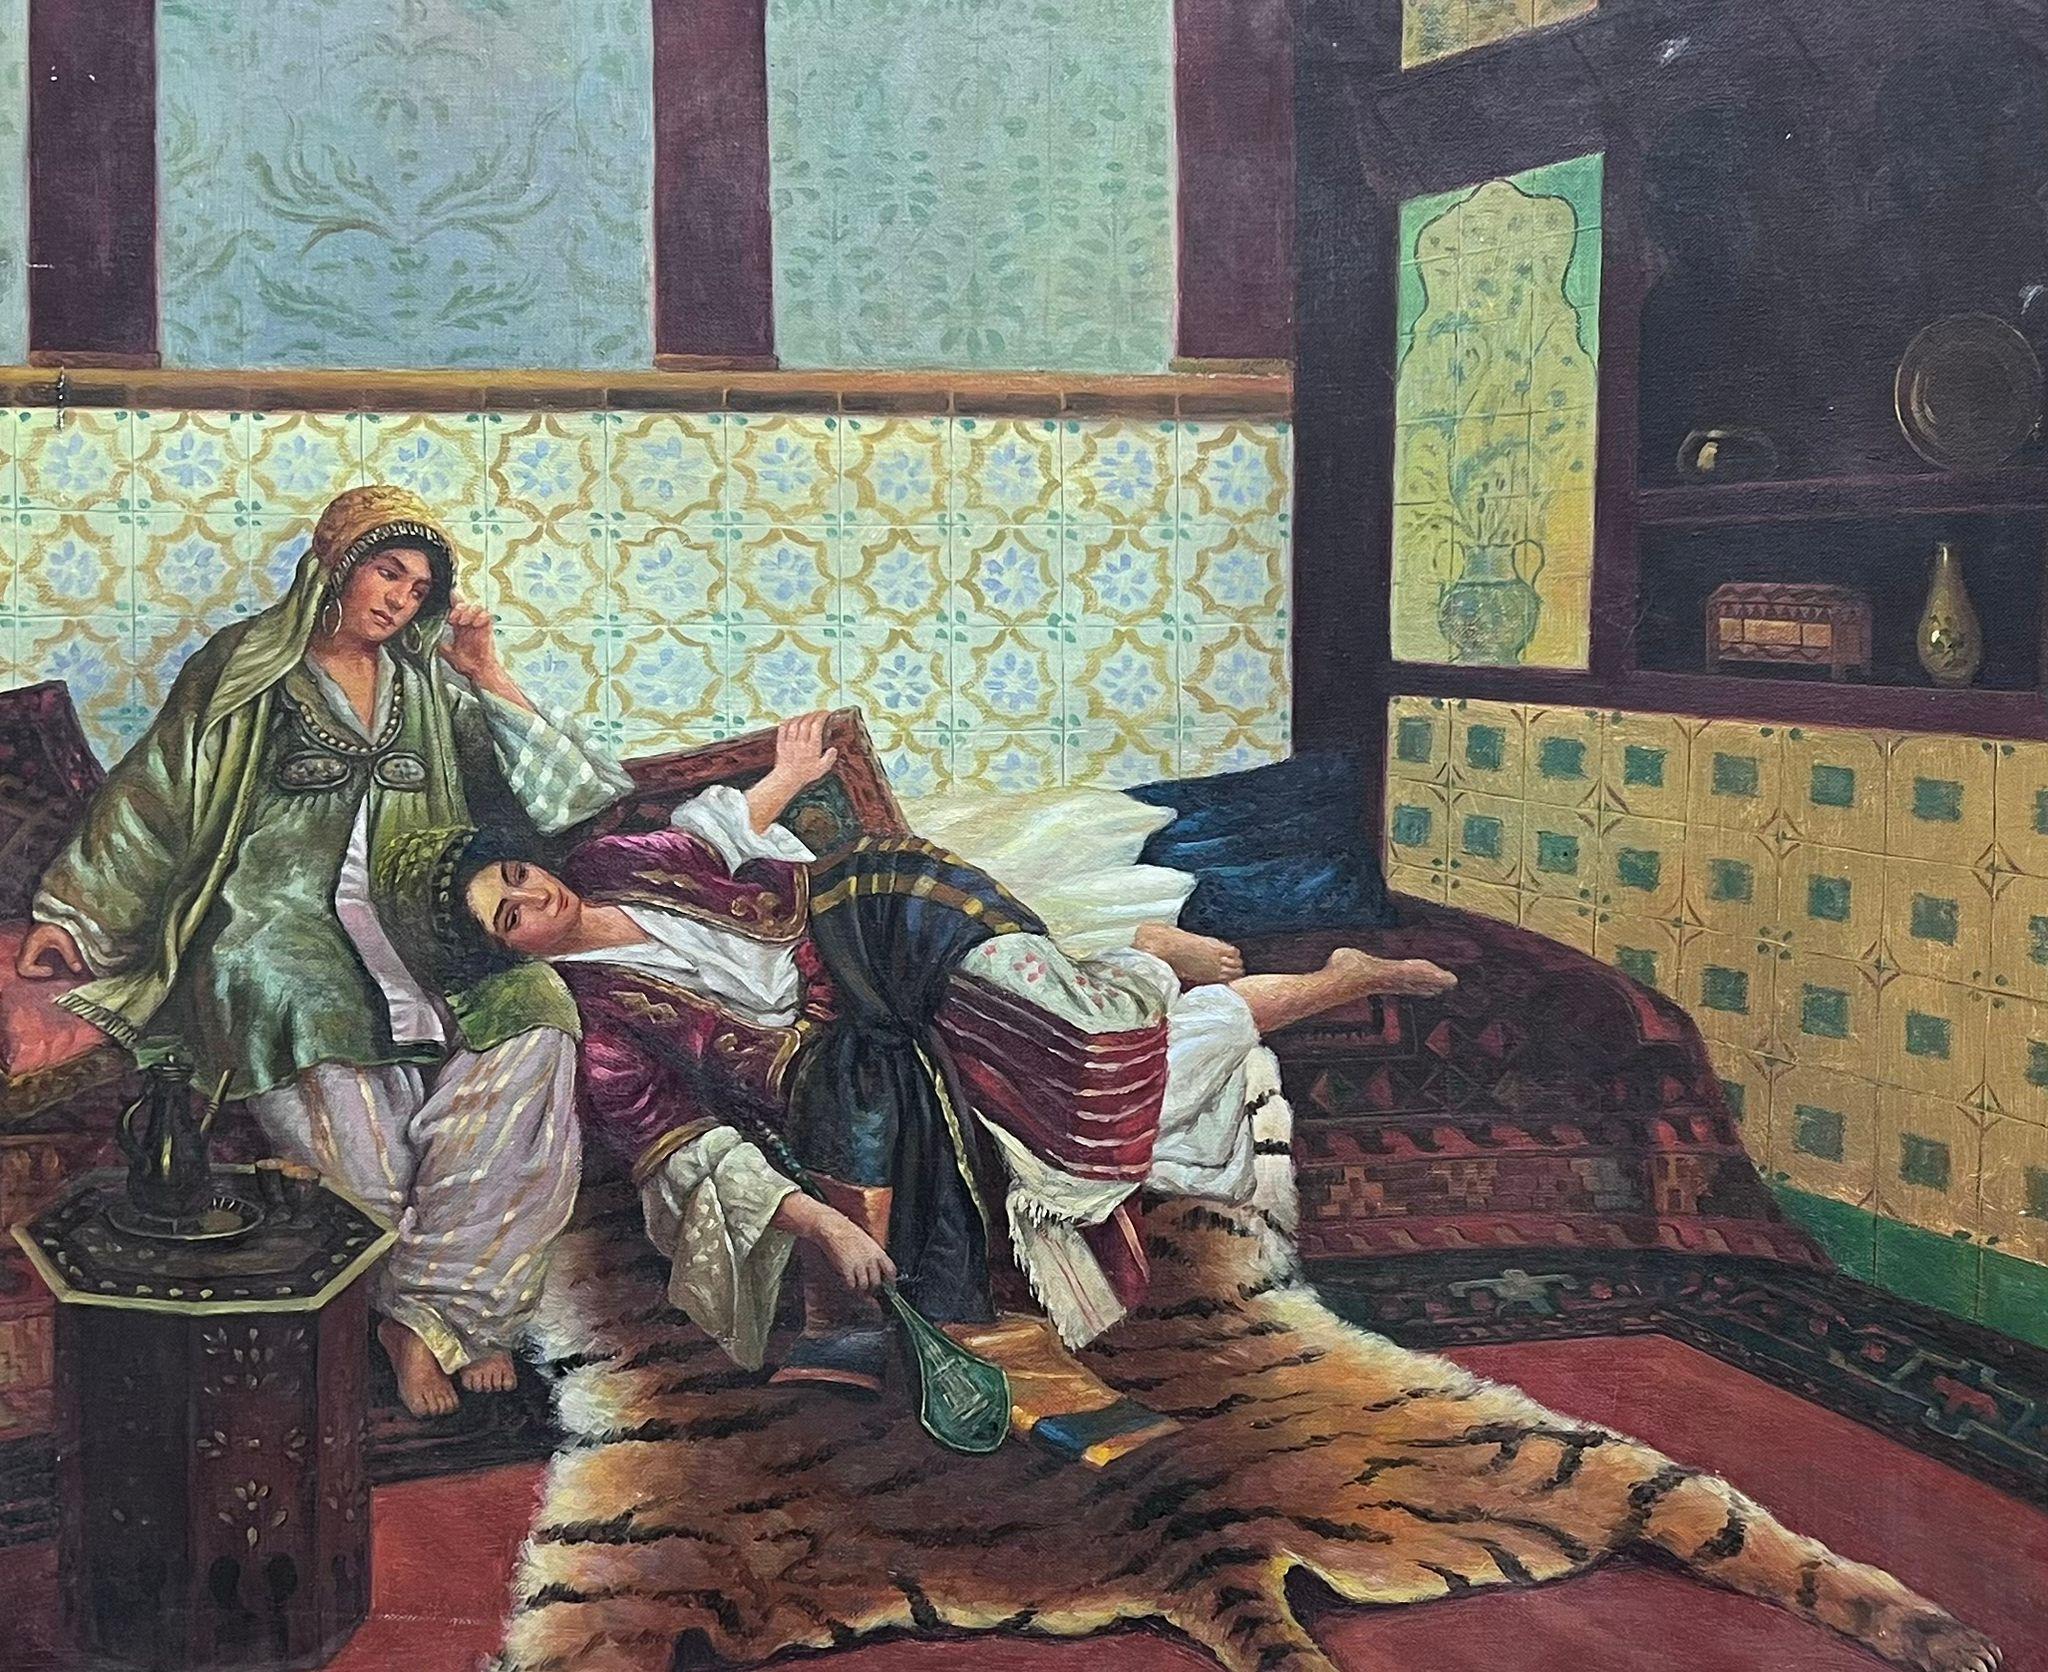 The Hareem Interior
French Orientalist School, late 20th century
(painted after an earlier style)
oil on canvas, framed
framed: 30 x 34 inches
canvas: 20 x 24 inches
provenance: private collection. UK
condition: very good and sound condition 